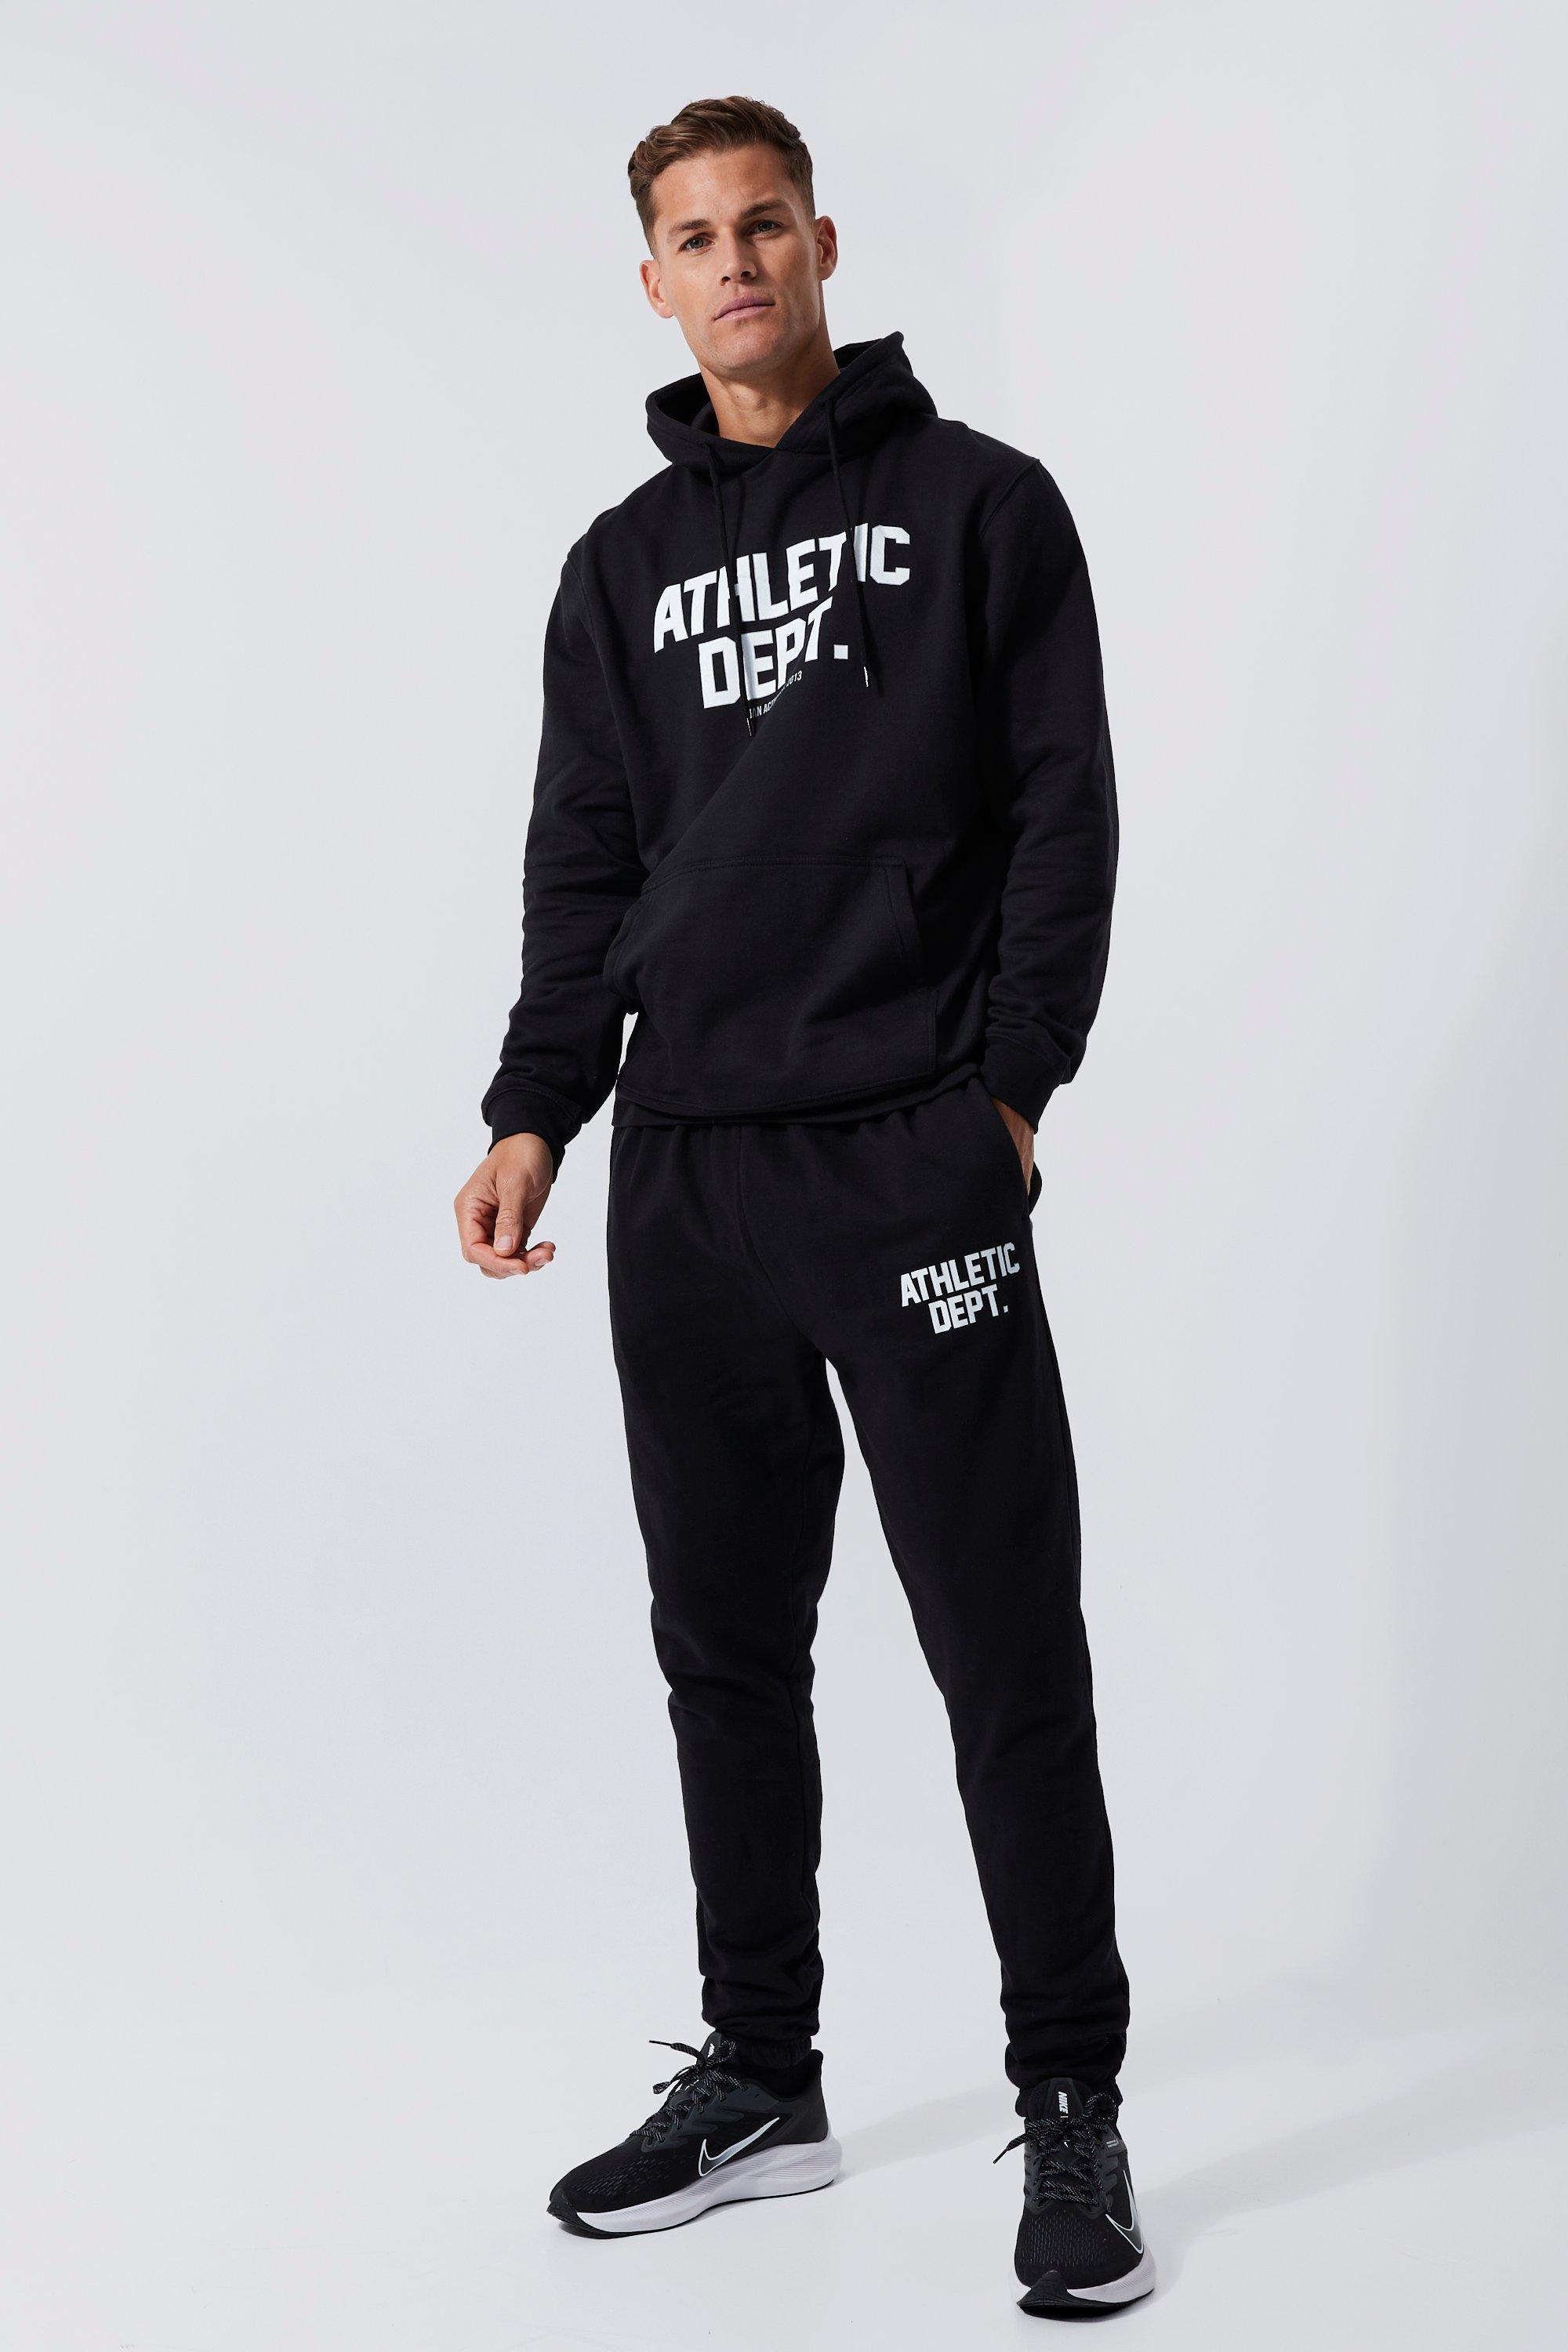 BoohooMAN Tall Man Active Athletic Dept Sweat Tracksuit in Black for ...